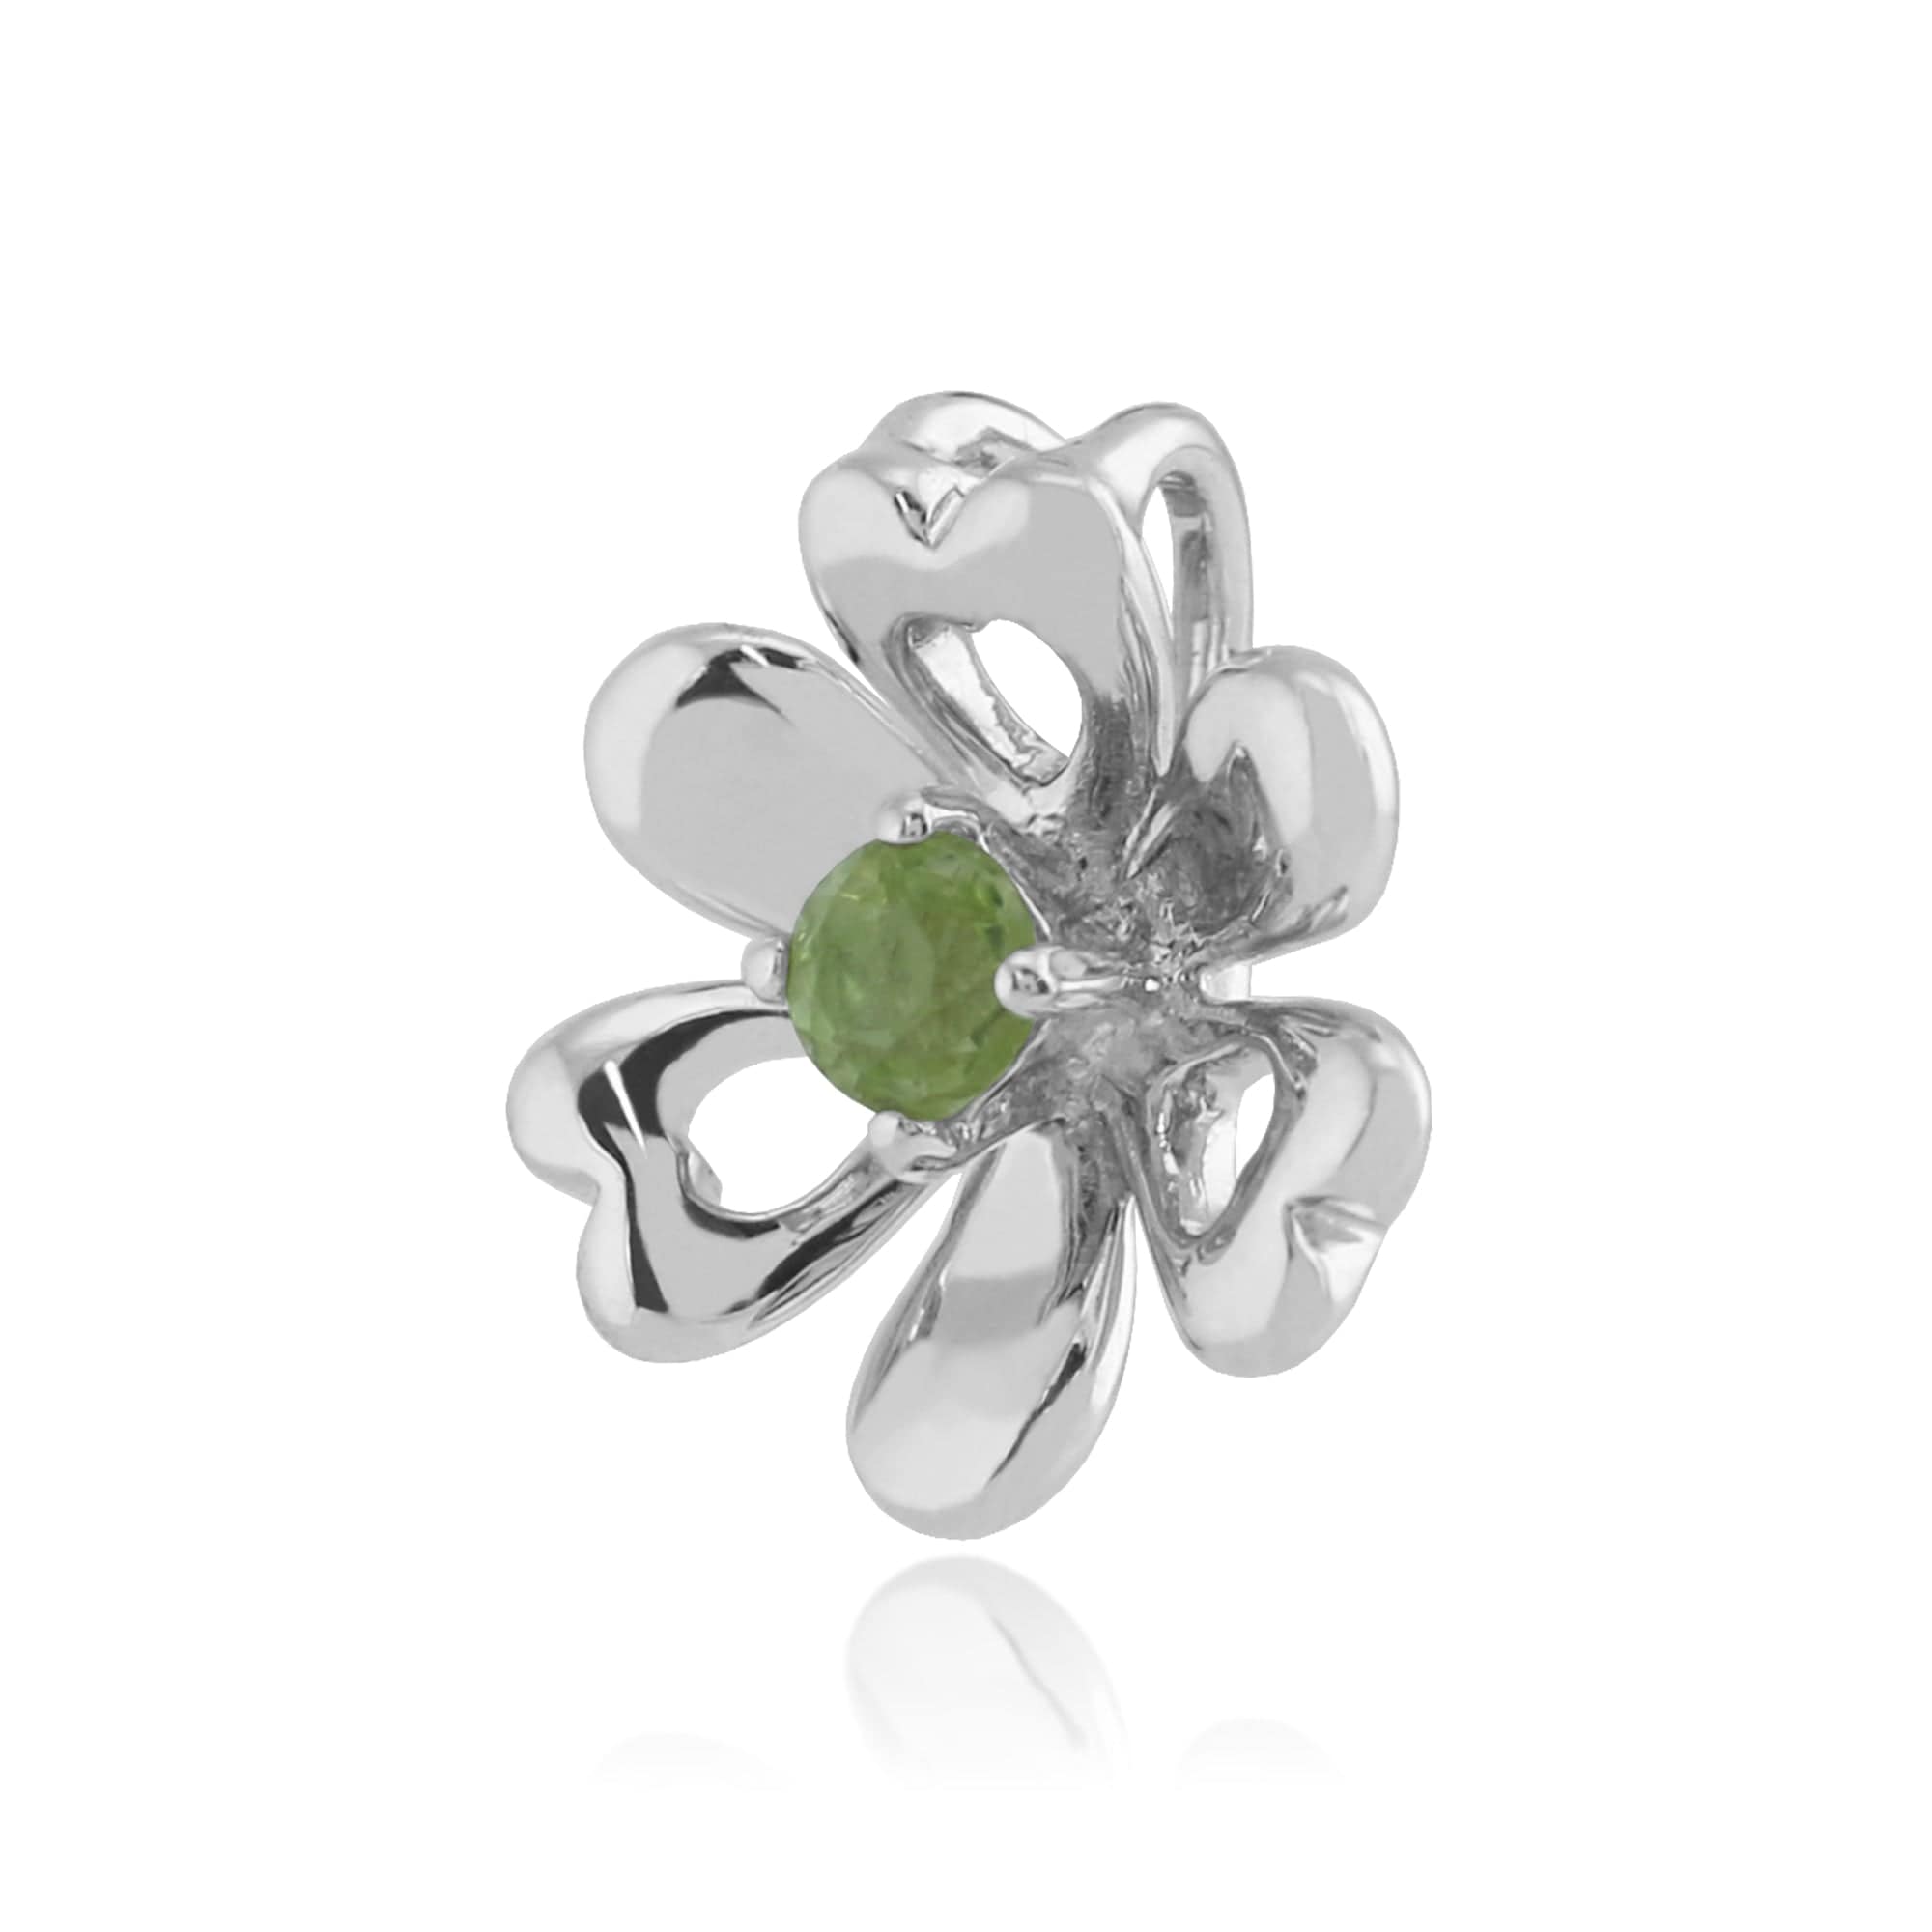 270P021901925 Floral Round Peridot Flower Single Stone Pendant in 925 Sterling Silver 2